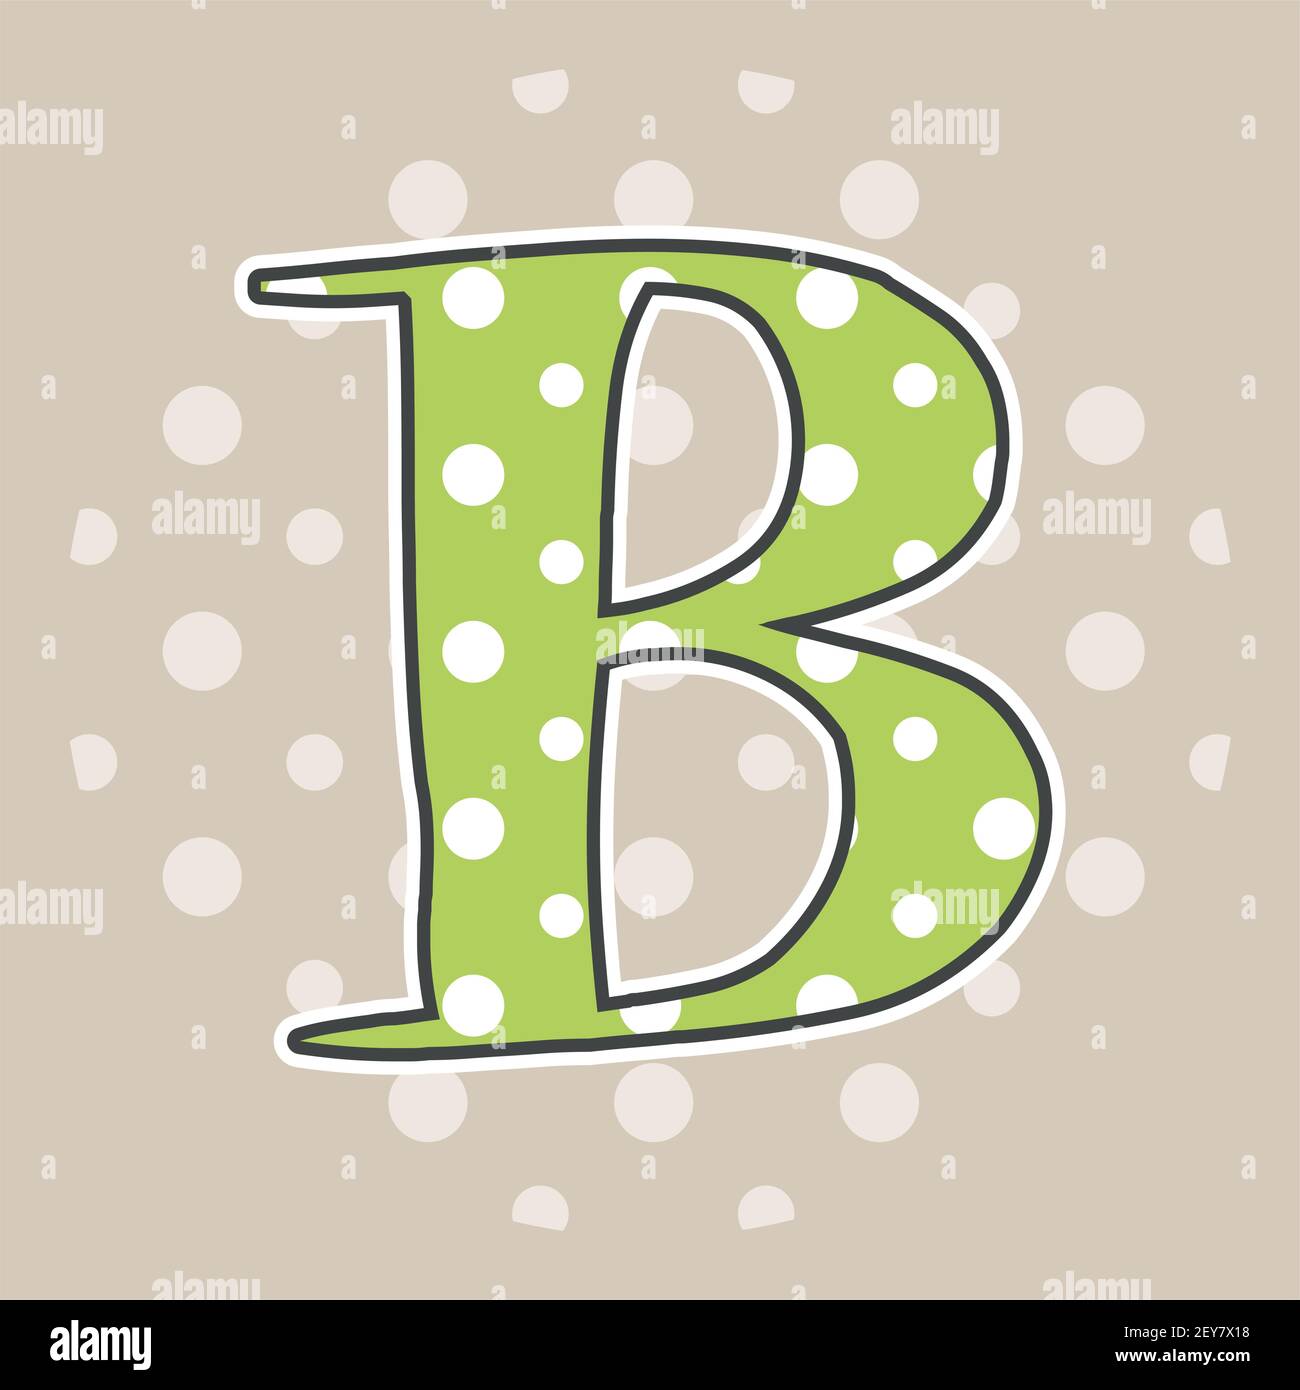 capital letter b with cute teddy bear and christmas design elements  isolated on white background. can be used for holiday season card, nursery  decoration or christmas party invitation Stock Vector